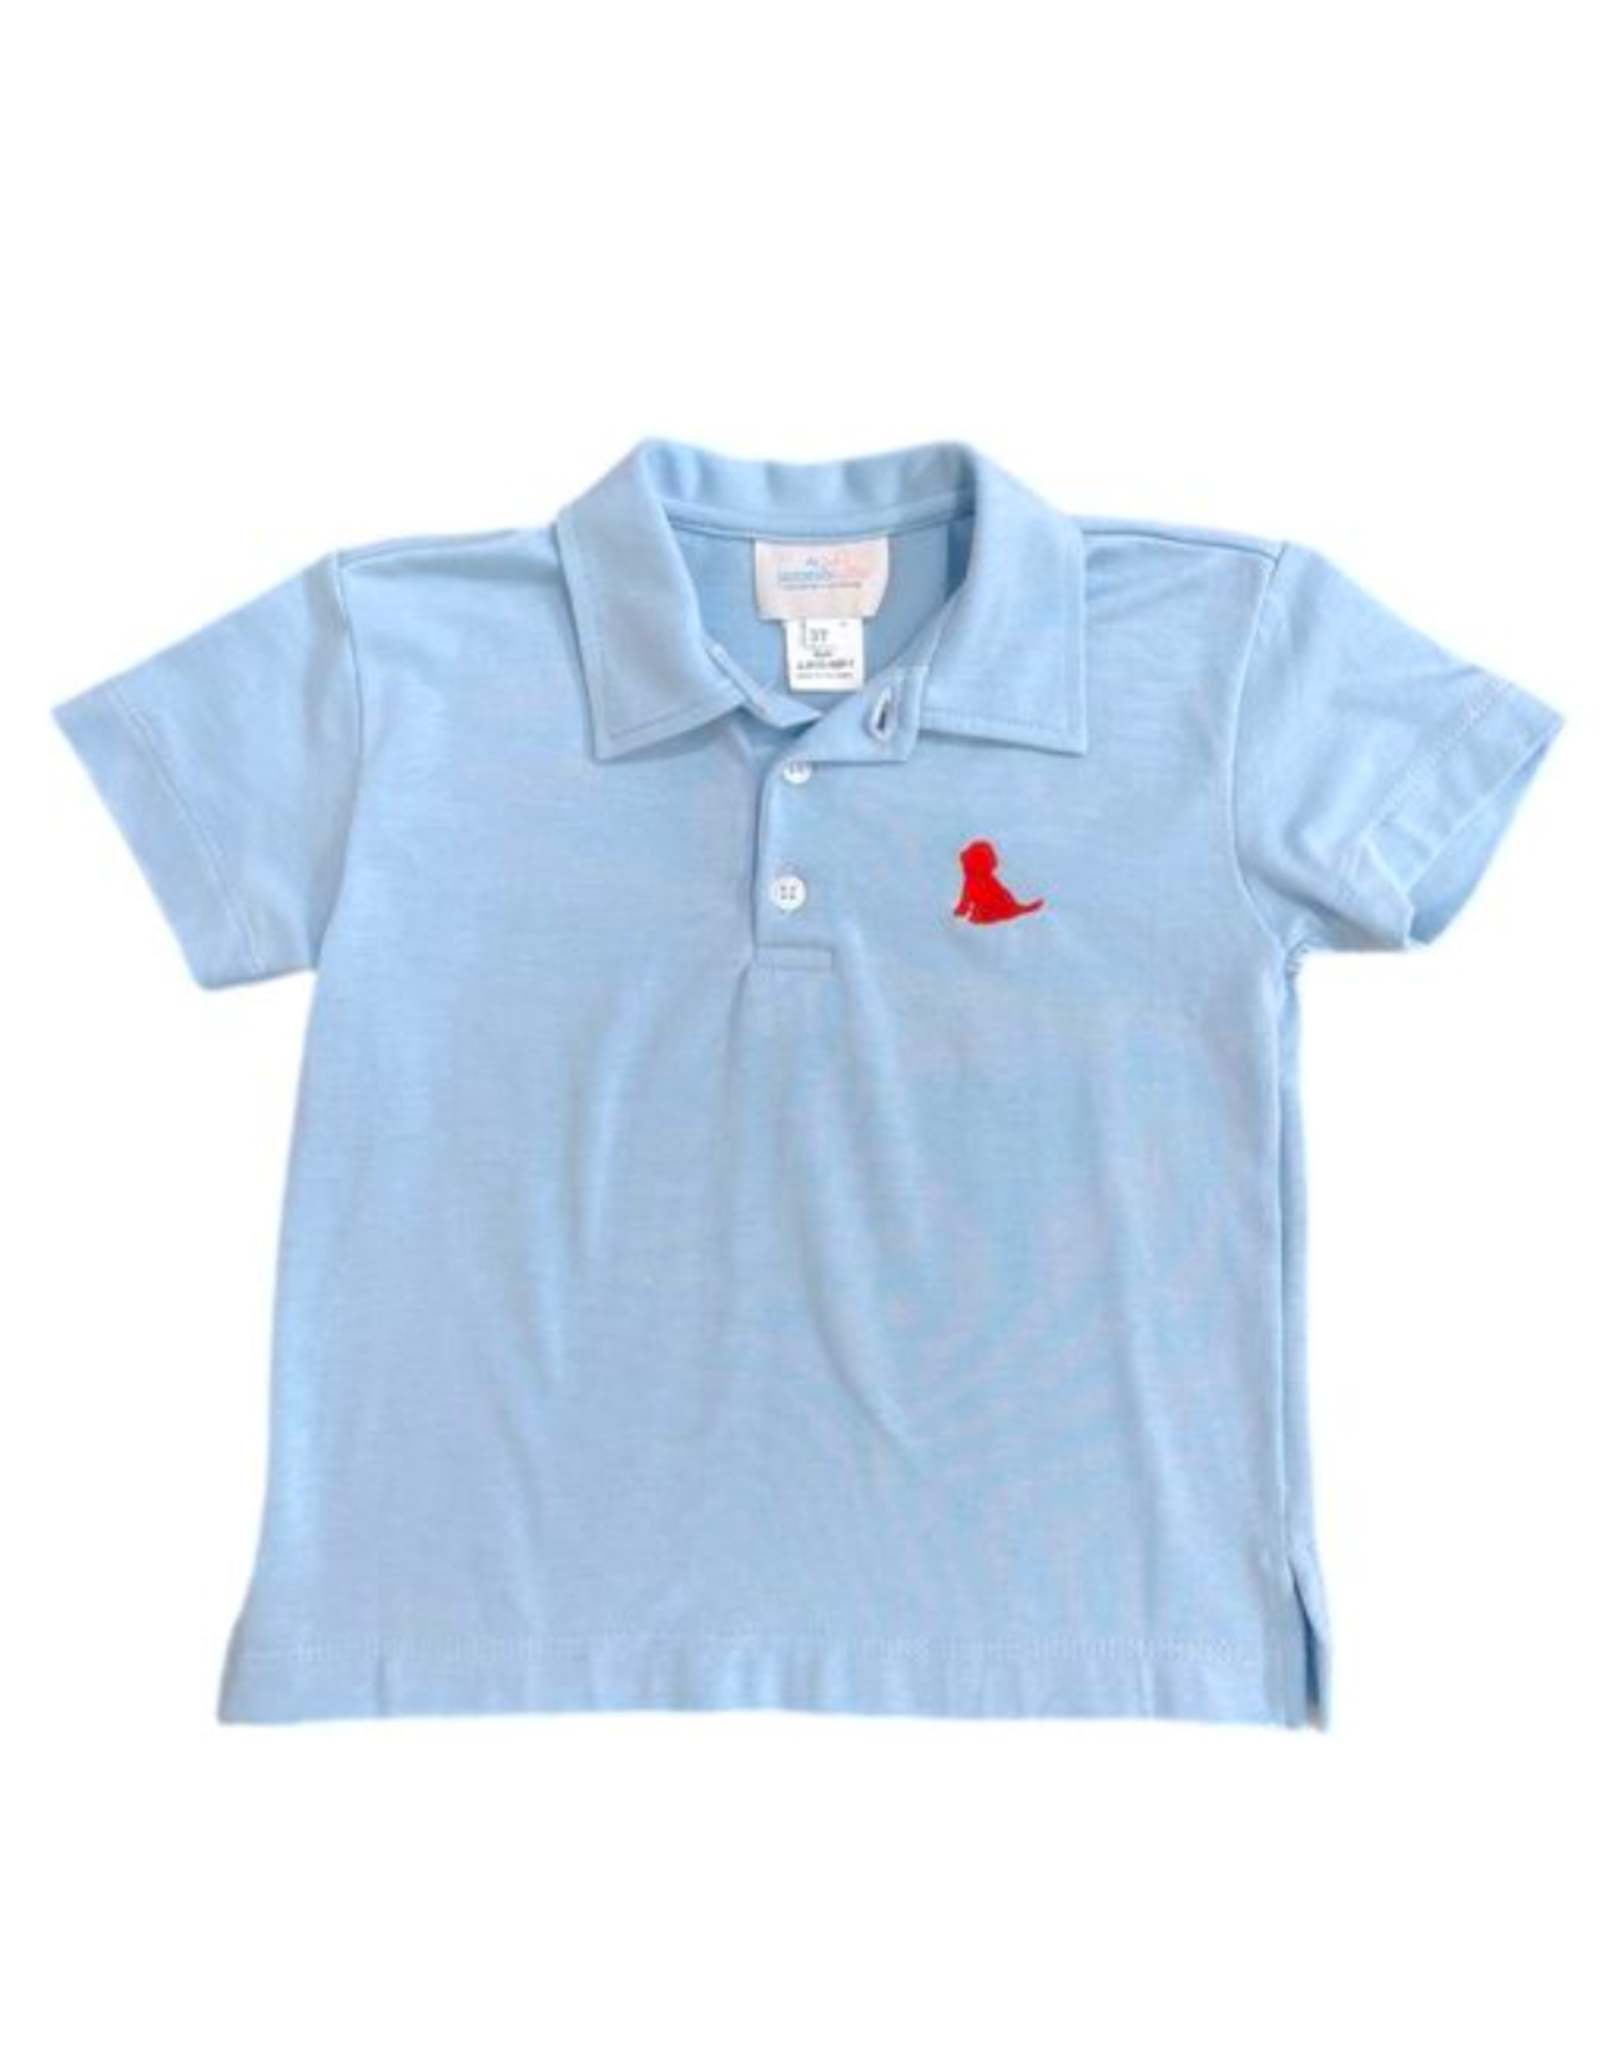 James and Lottie Blue Polo with Red Puppy *PRESALE*